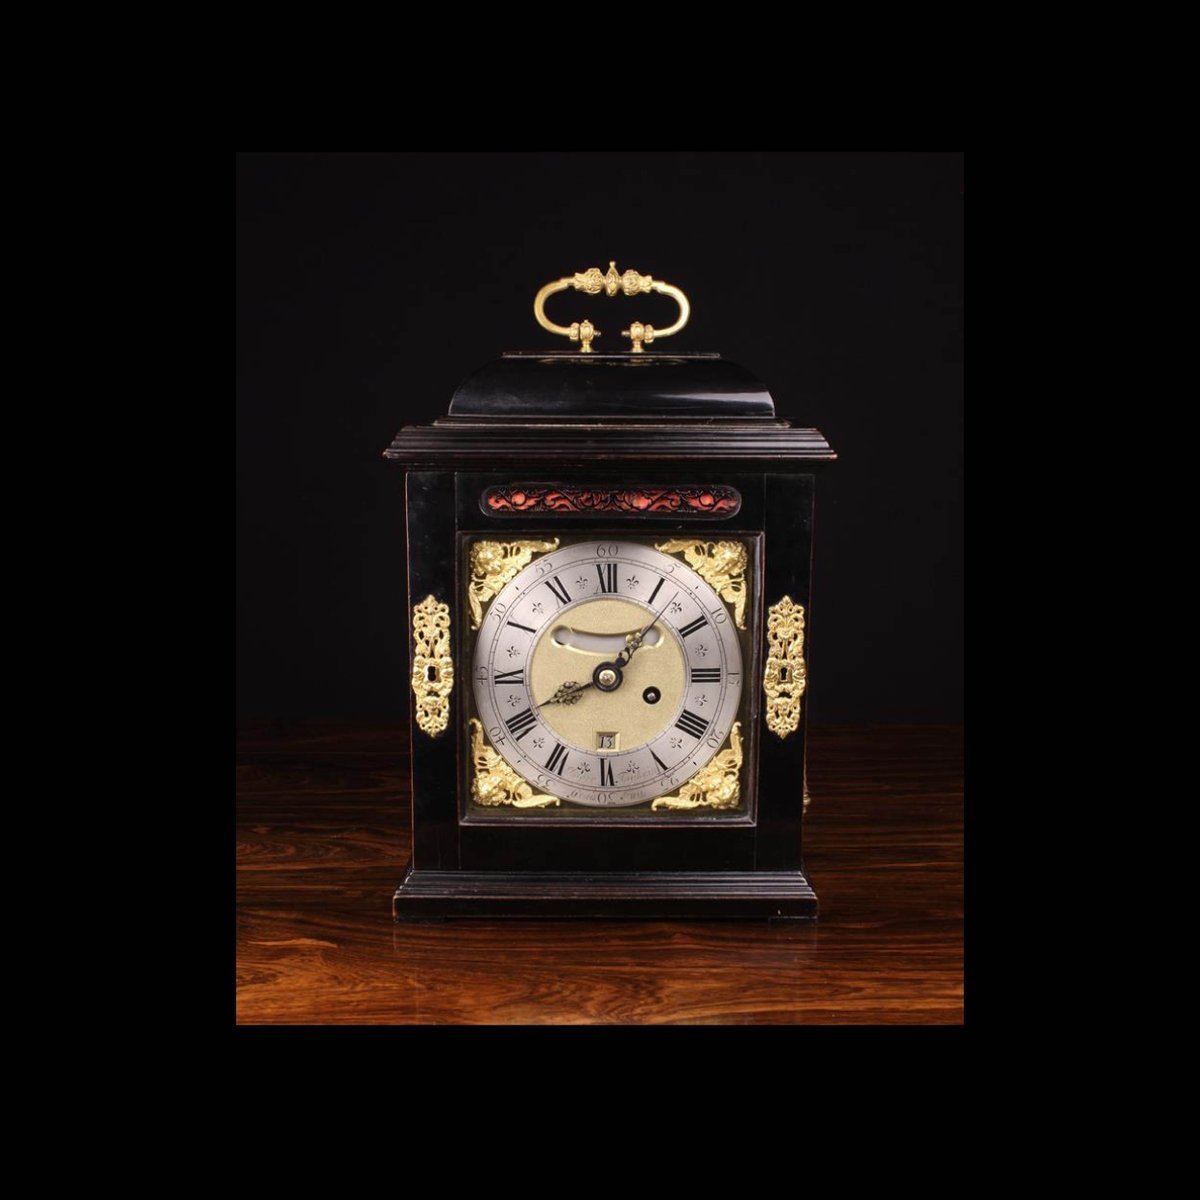 Final chance to get your hands on a decorative piece in our last sale day. Lot 626. A Fine Late 17th Century Ebony Veneered Table Timepiece signed Jasper Taylor, In Grais Inn, Circa 1695. #auction #onlineauction #auctionhouse #auctioneer #vintage #auctioneers #bid #antiques